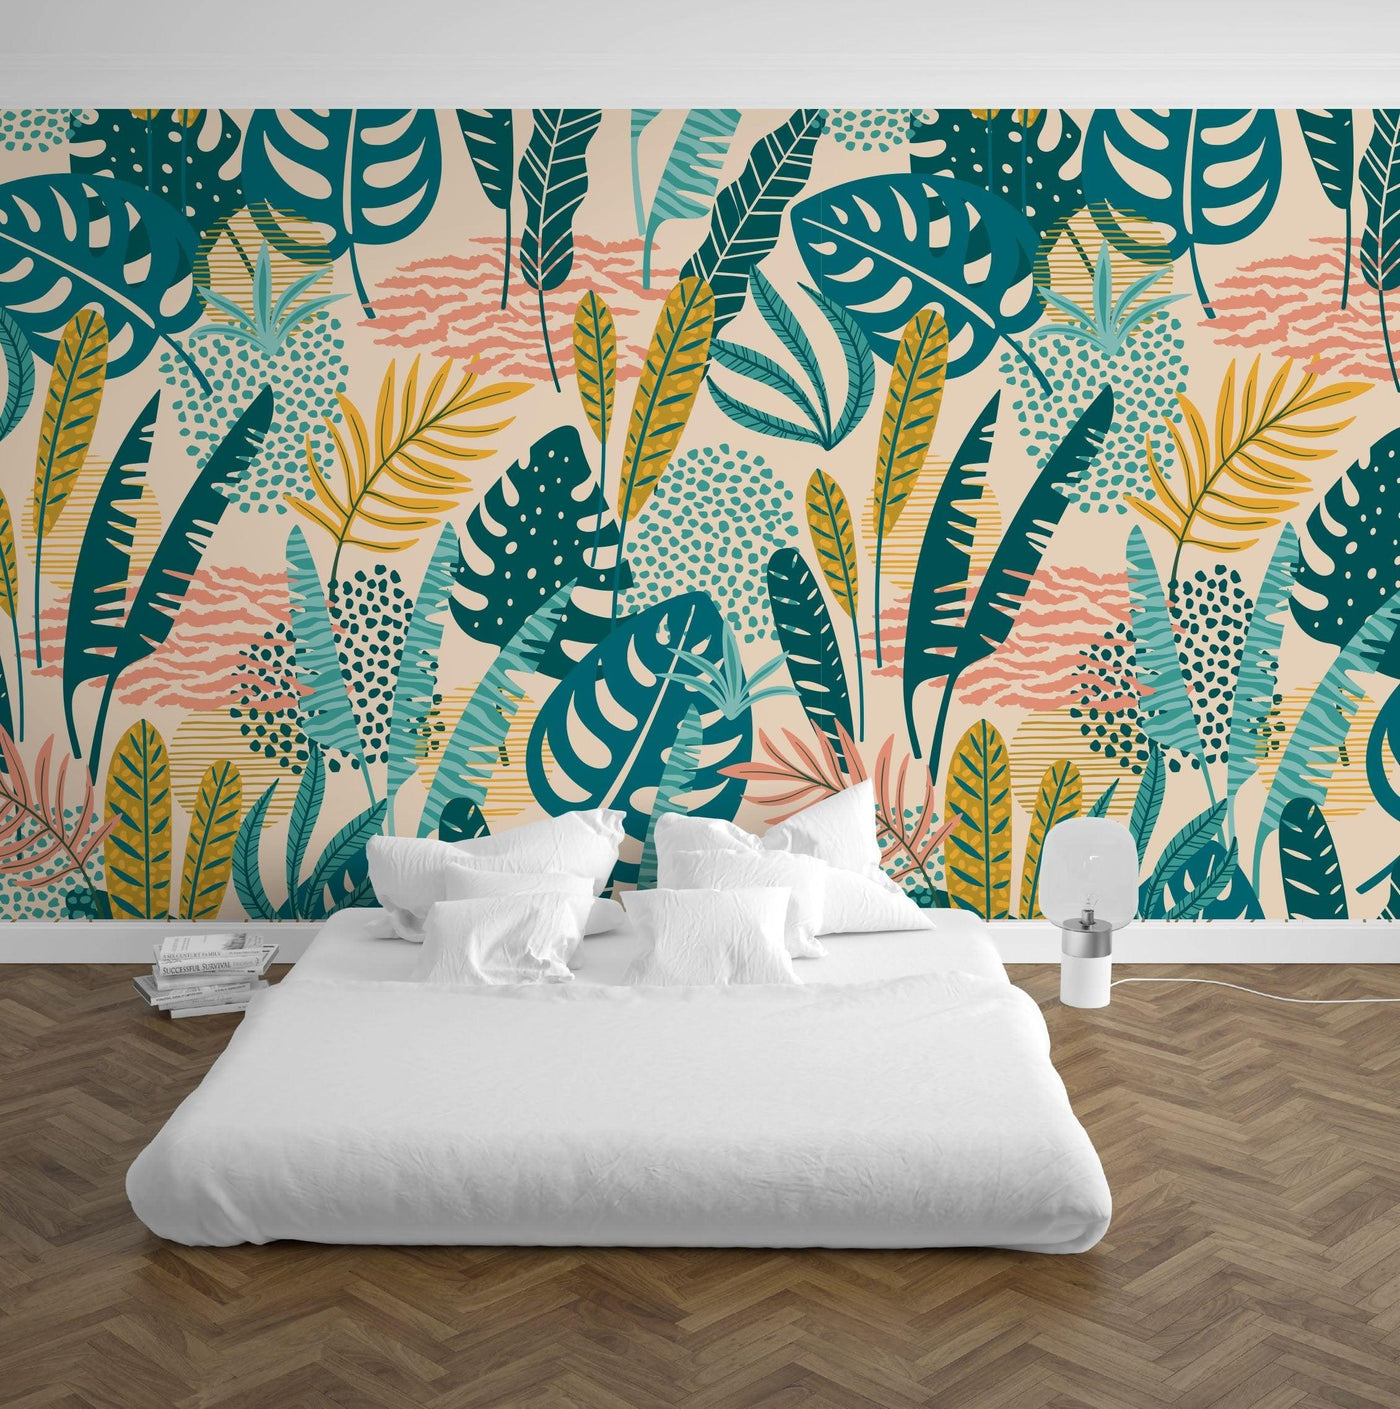 Pop Leaves Mural Wallpaper (m²)-Wall Decor-LEAF WALLPAPER, MURALS, MURALS / WALLPAPERS, NATURE WALL ART, NON-WOVEN WALLPAPER-Forest Homes-Nature inspired decor-Nature decor